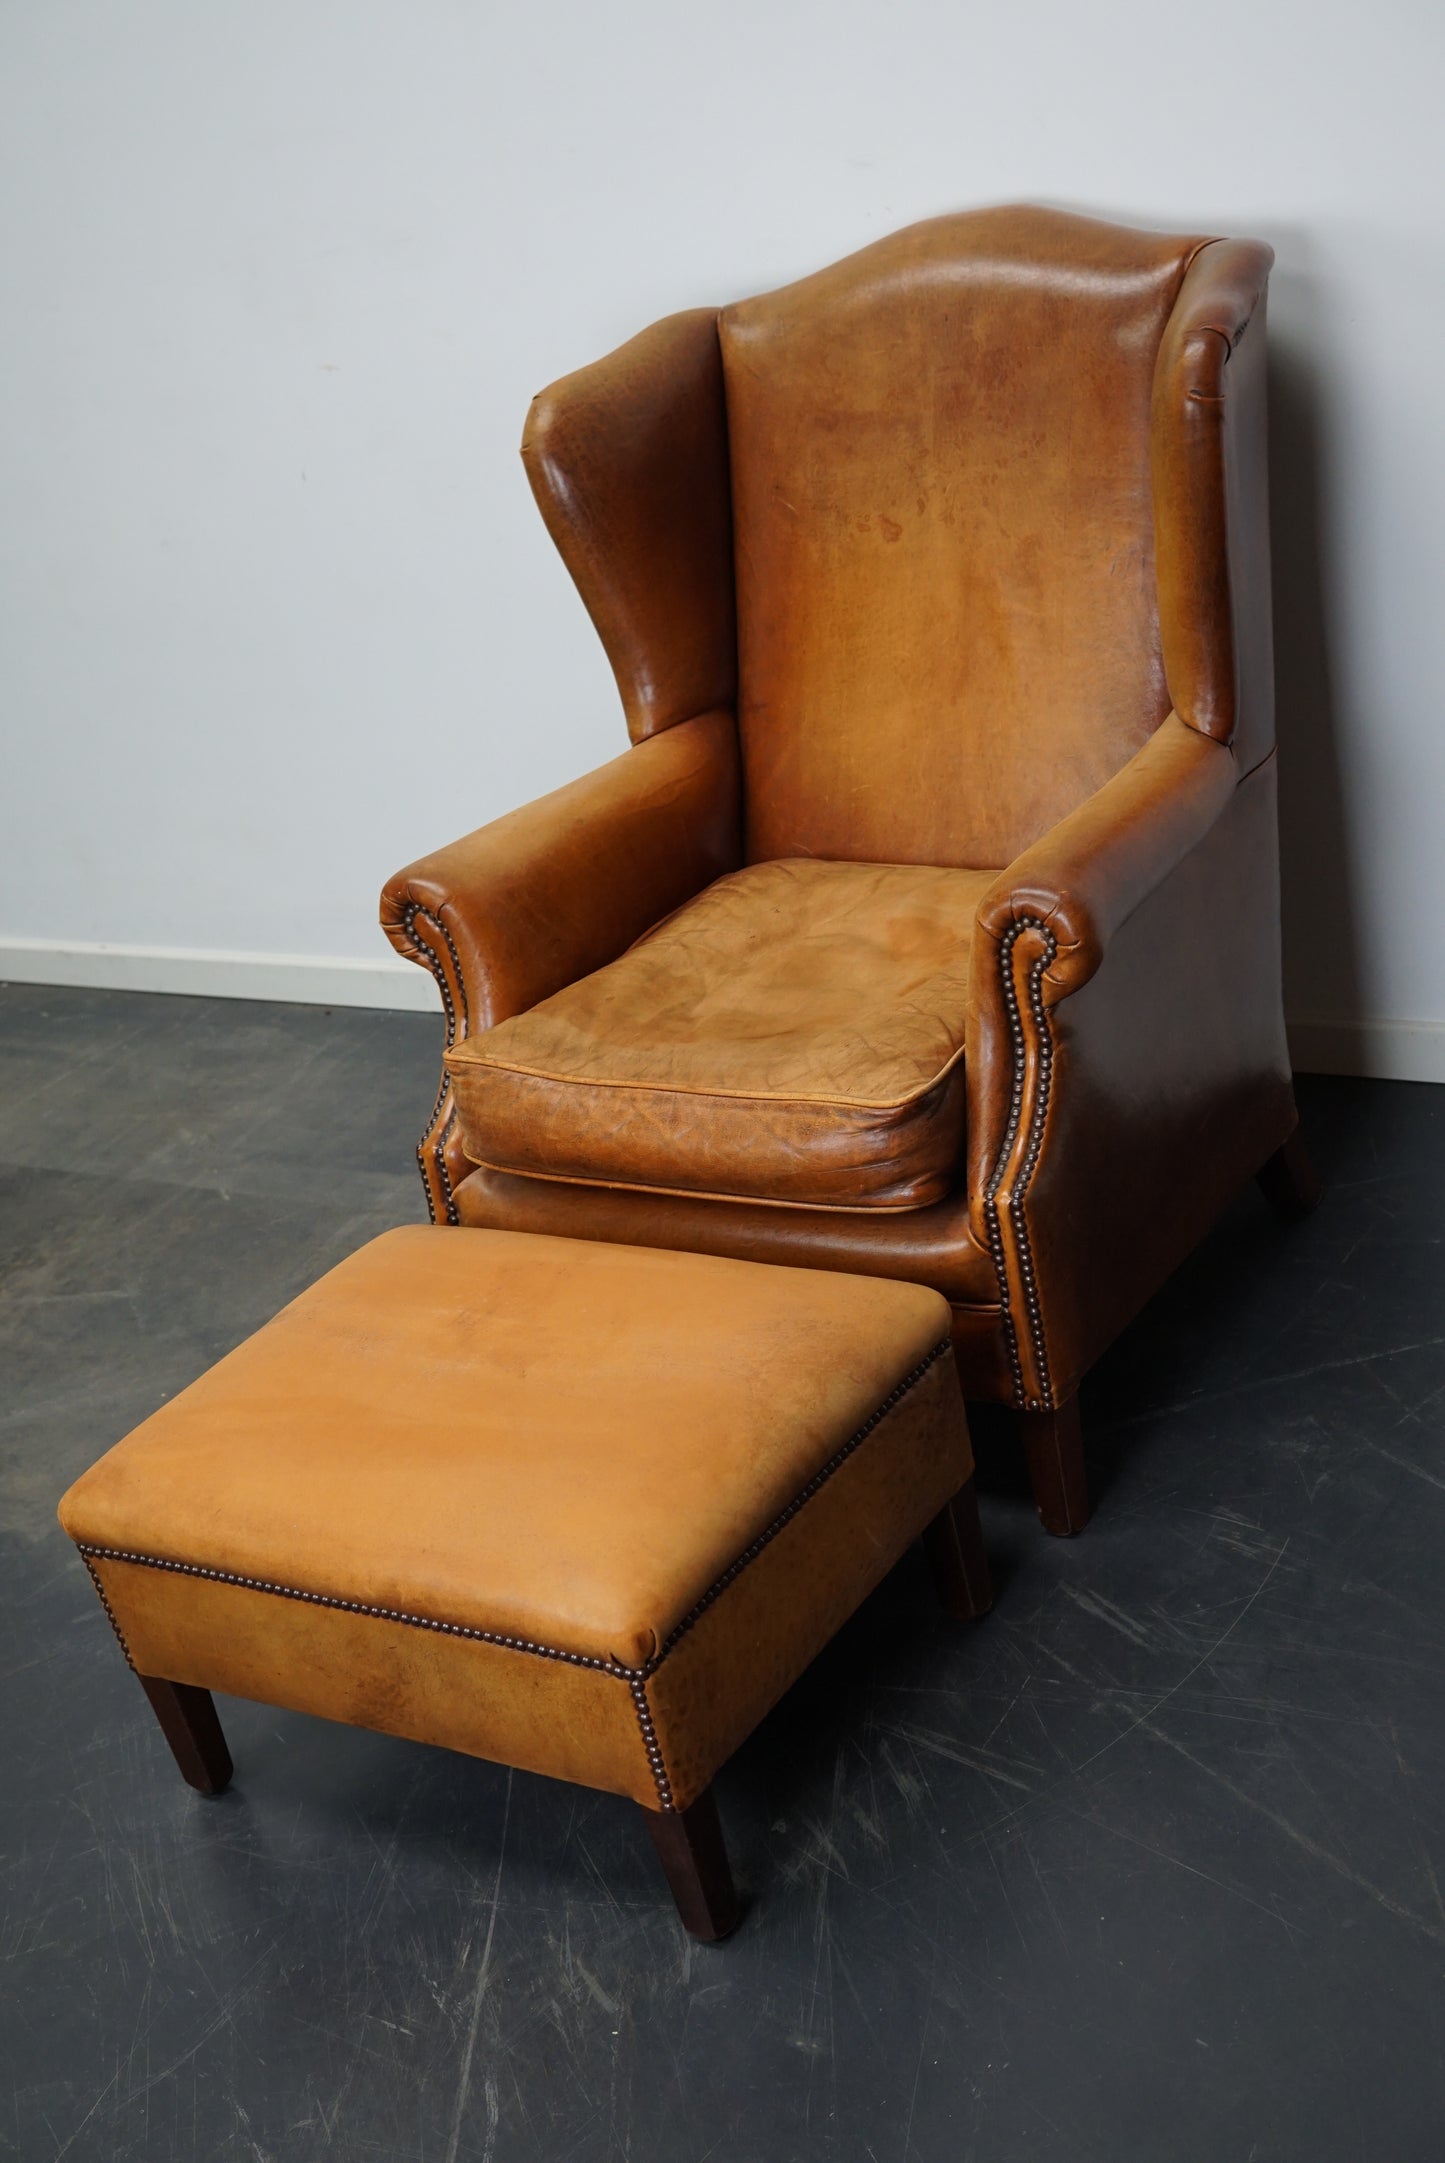 Vintage Dutch Cognac Colored Wingback Leather Club Chair with Footstool